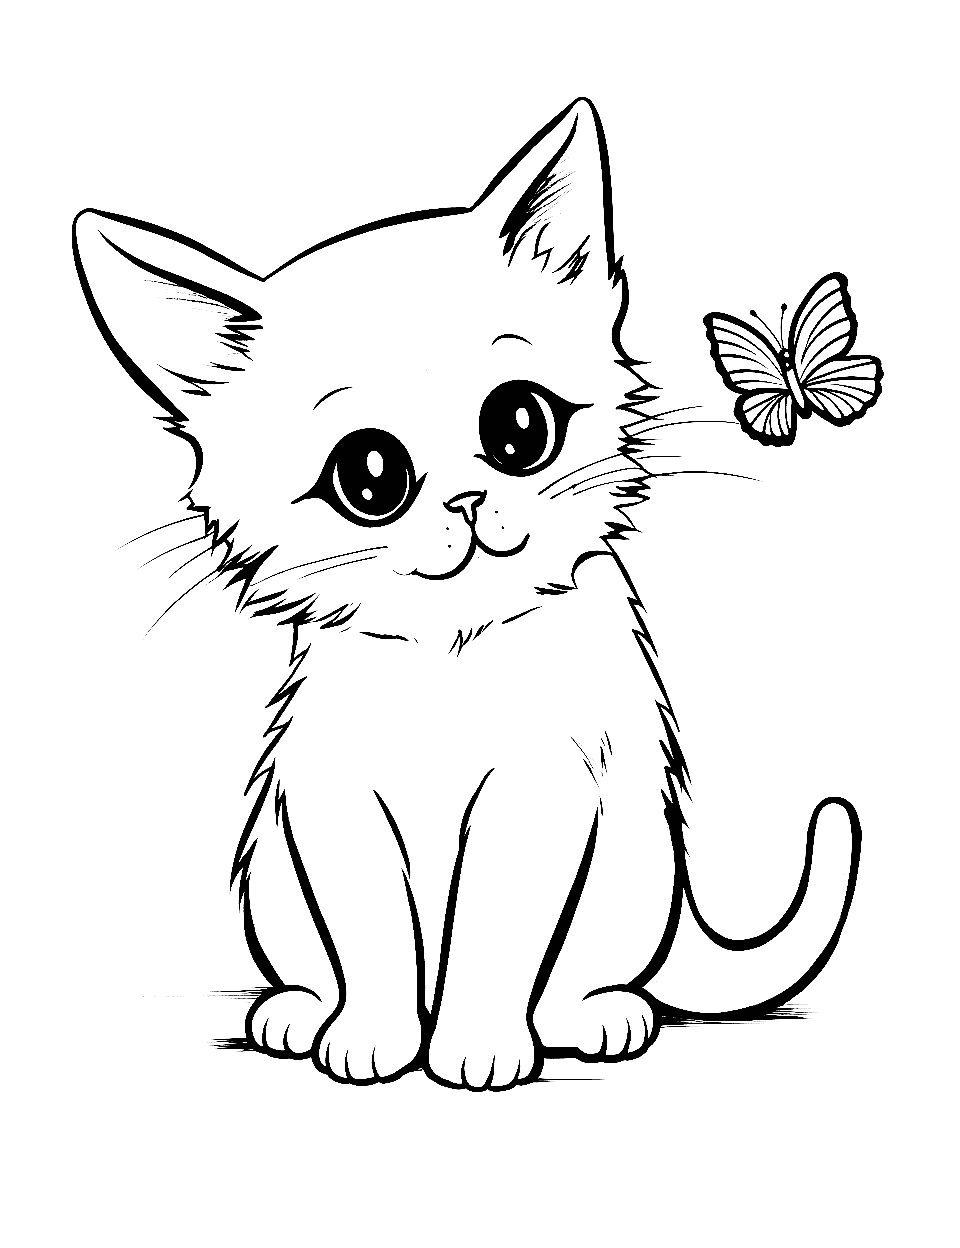 Baby Cat and Butterfly Kitten Coloring Page - A baby cat sitting and looking at a nearby butterfly.